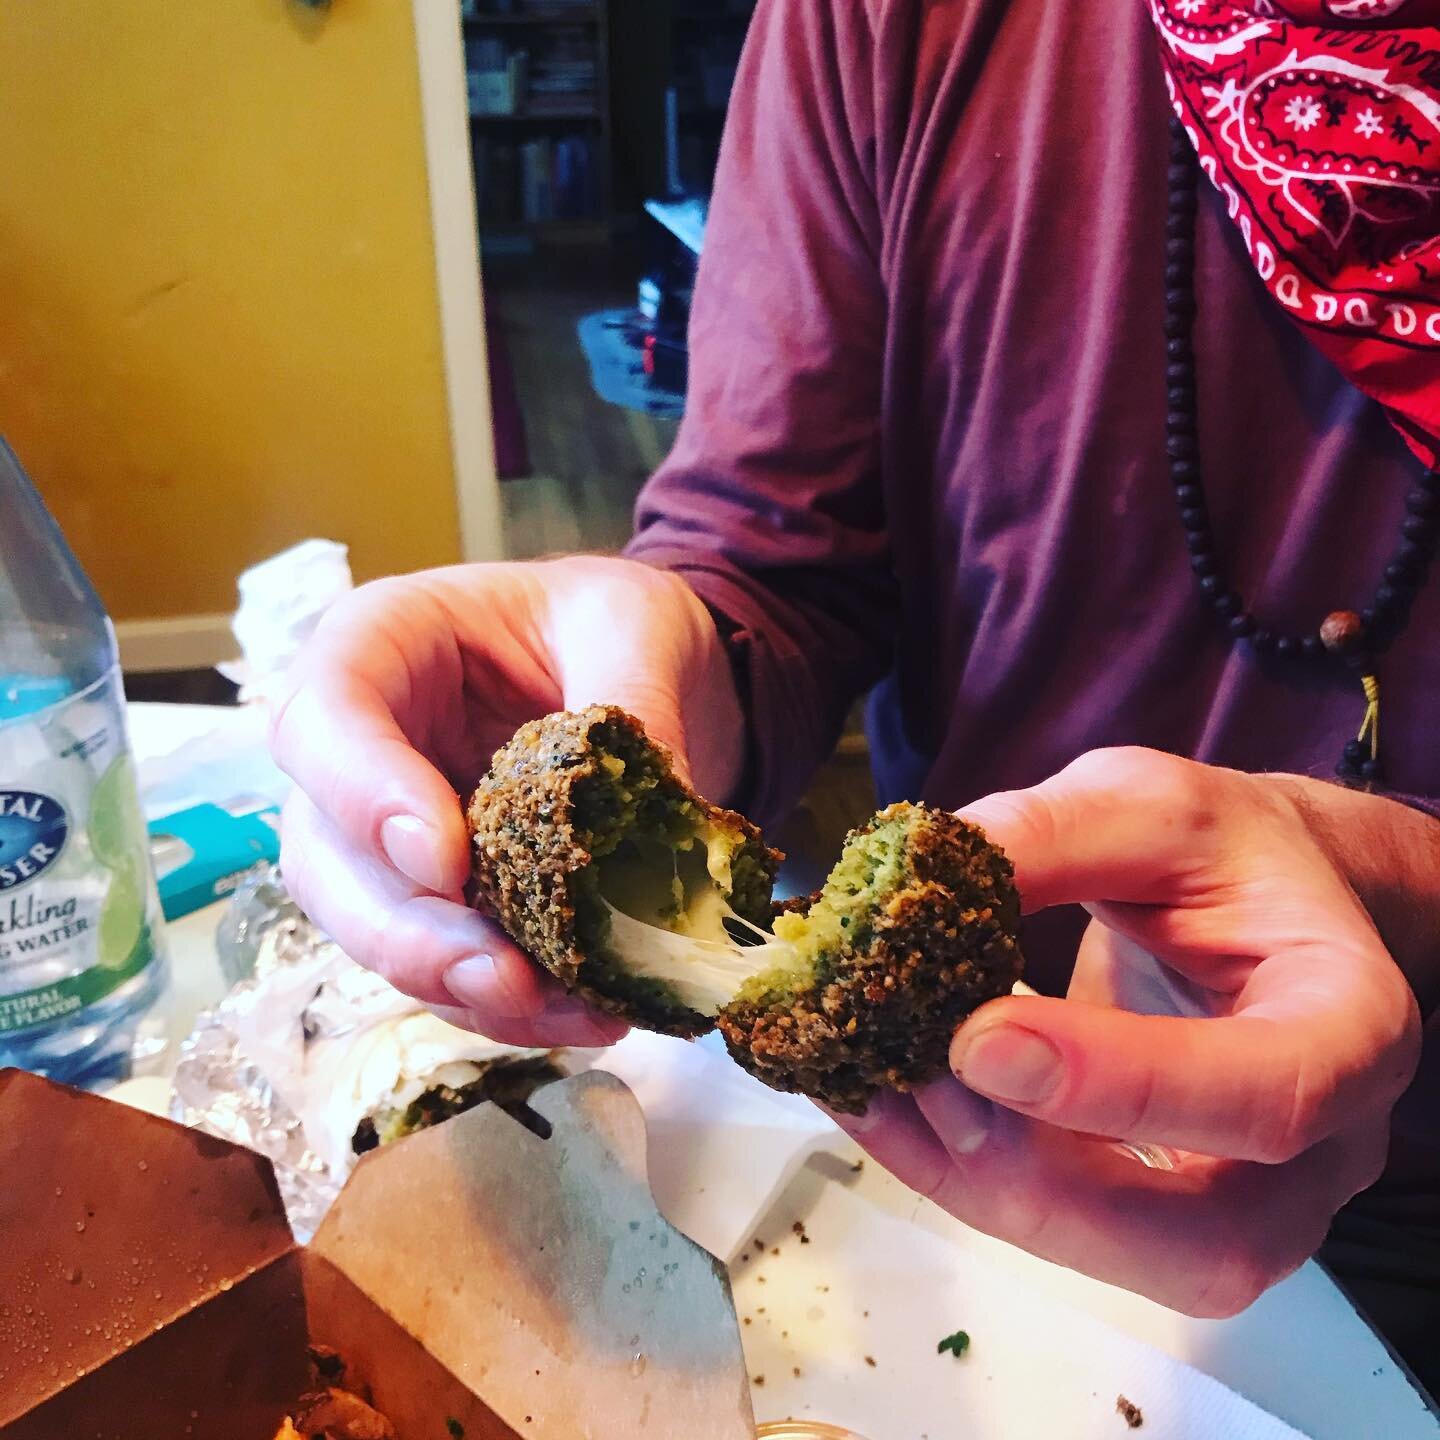 Ummmm yess for #mozerella stuffed #falafel and fire 🔥 #shawerma for dinner from my local #haightashbury #smallbusiness friends @abusalimmegsf yah, only #middleasternfood north of divisadero worth going after 🍄❤️🙏🔥 ✌️
&bull;
&bull;
&bull;
&bull;
&